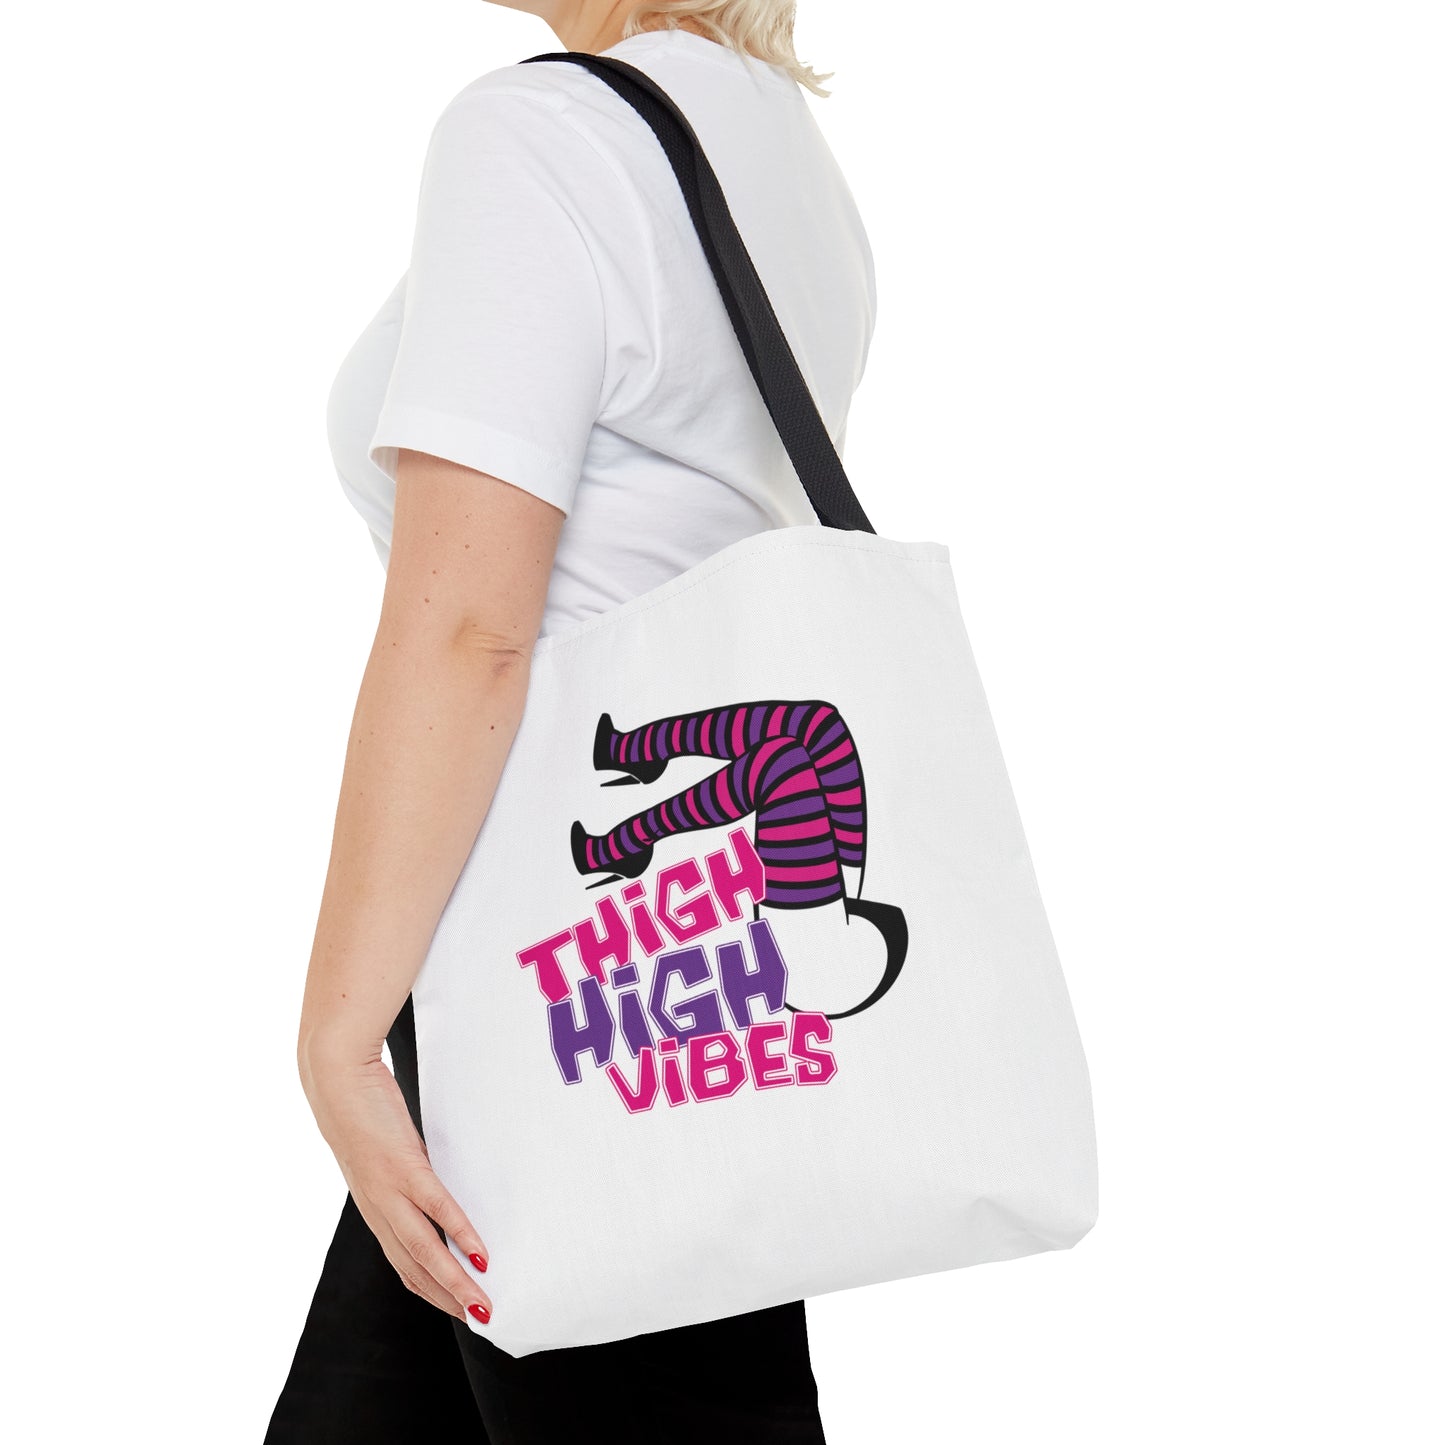 Thigh High Vibes Tote